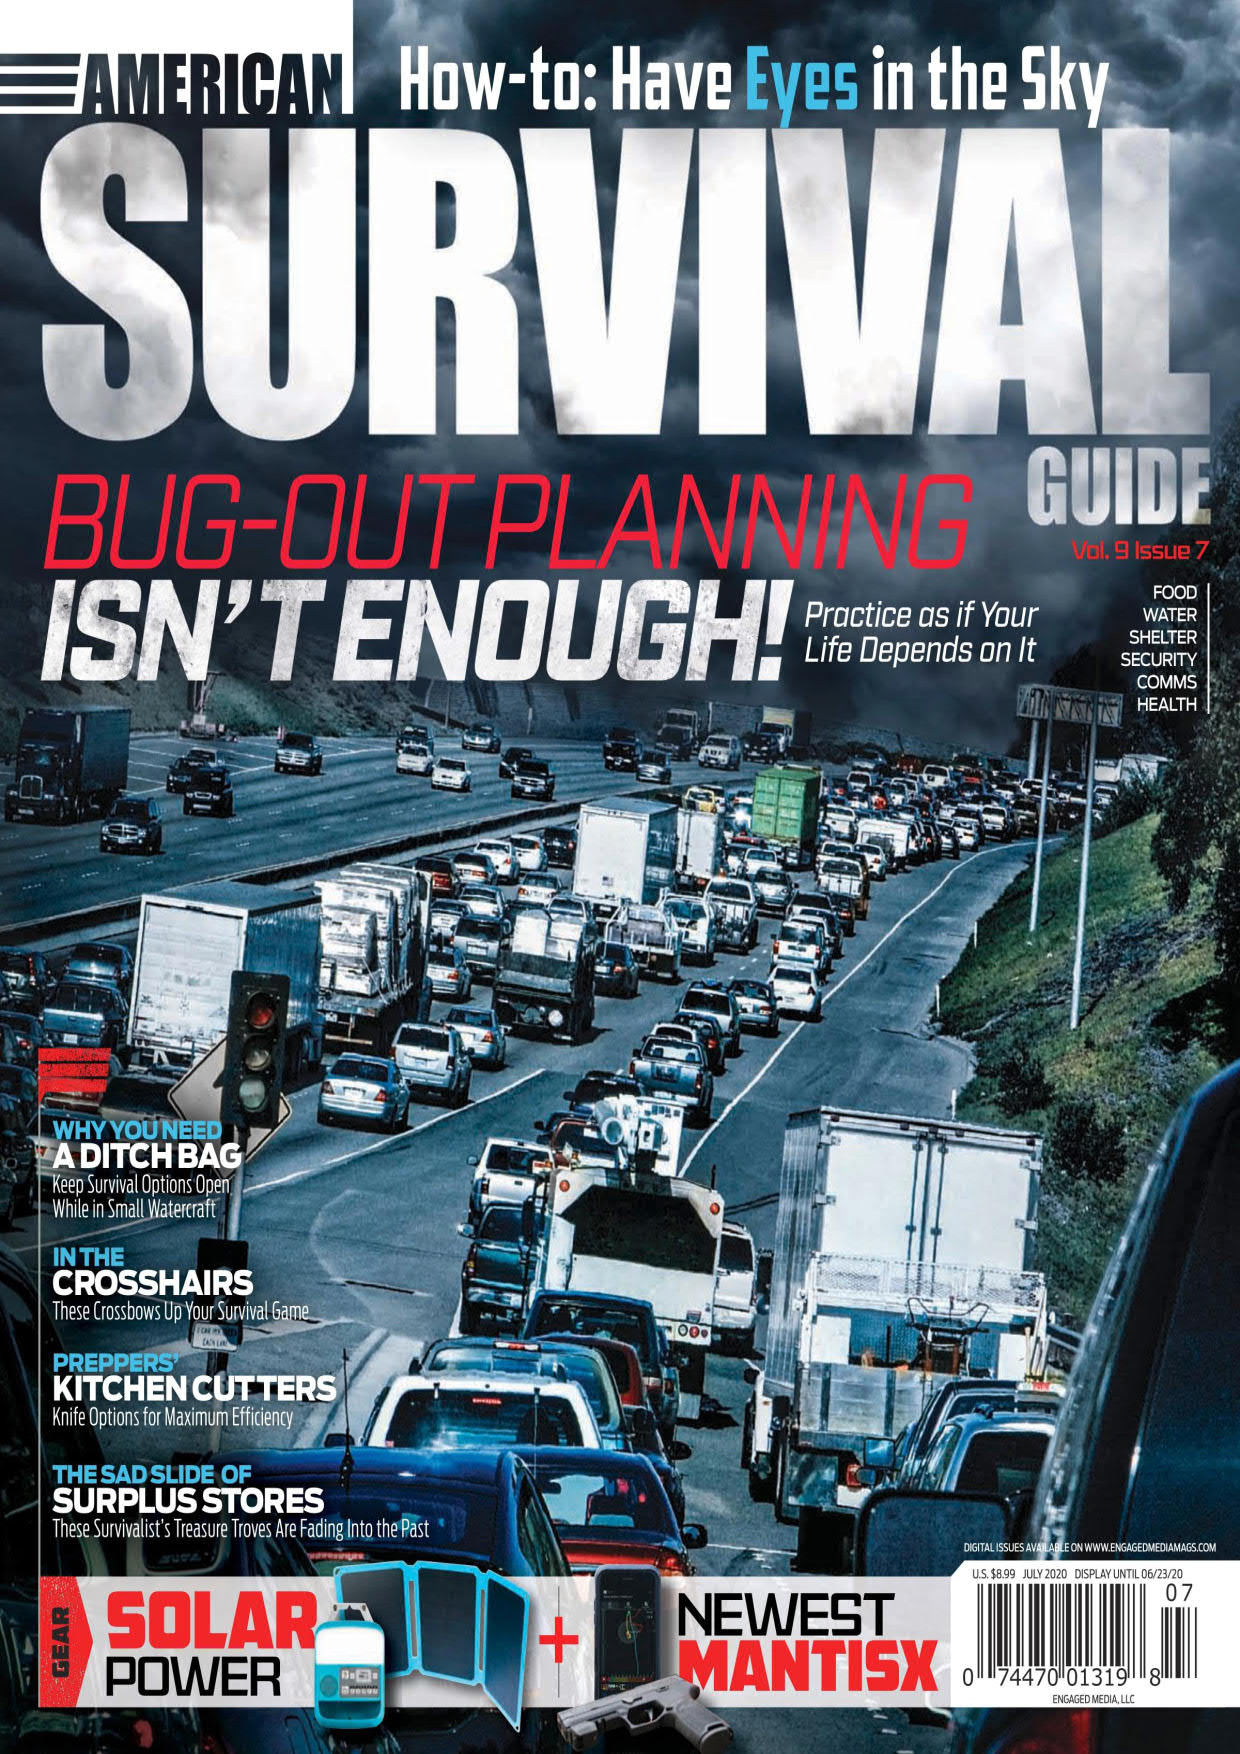 Download American Survival Guide Vol. 9 Issue 7, July 2020 SoftArchive